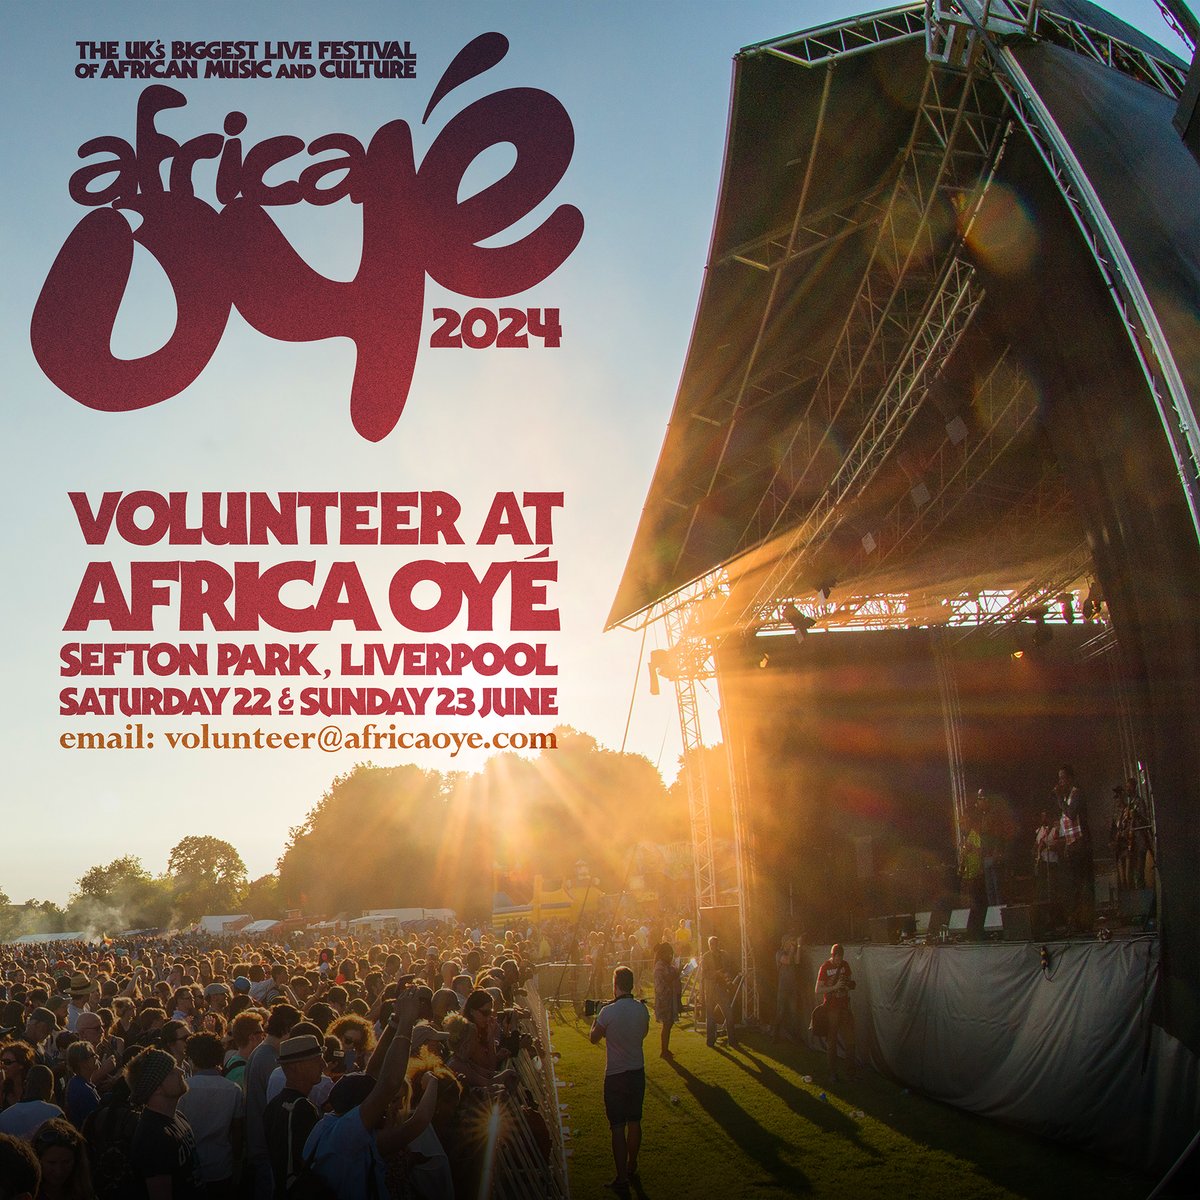 'We want to make sure that everyone who's enjoying our free festival has the chance to show their appreciation by donating whatever amount they can & we can only make that happen with a dedicated team of volunteers on site interacting with the audience.' tinyurl.com/34zb4fty